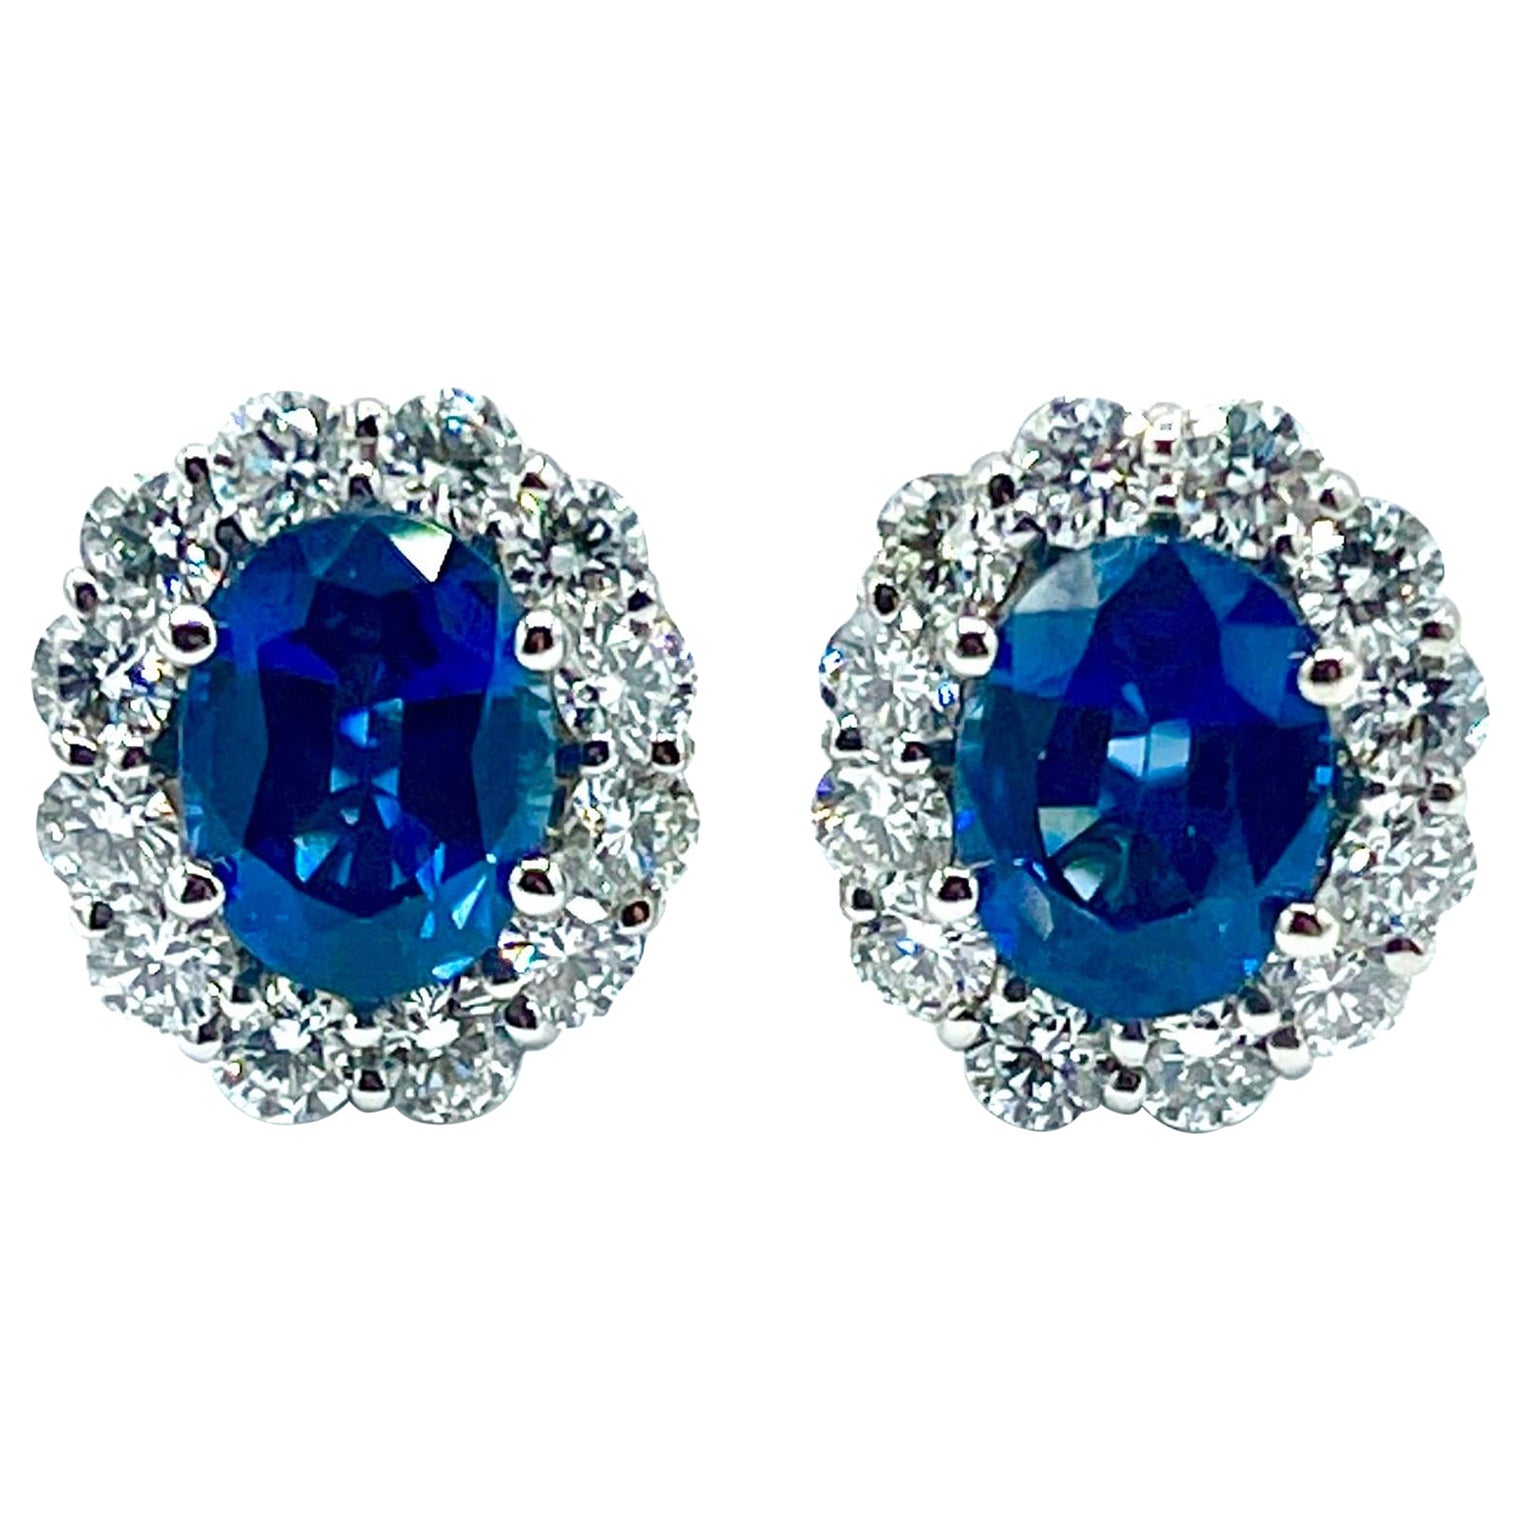 3.16 Carat Oval Sapphires and Round Brilliant Diamond White Gold Stud Earrings